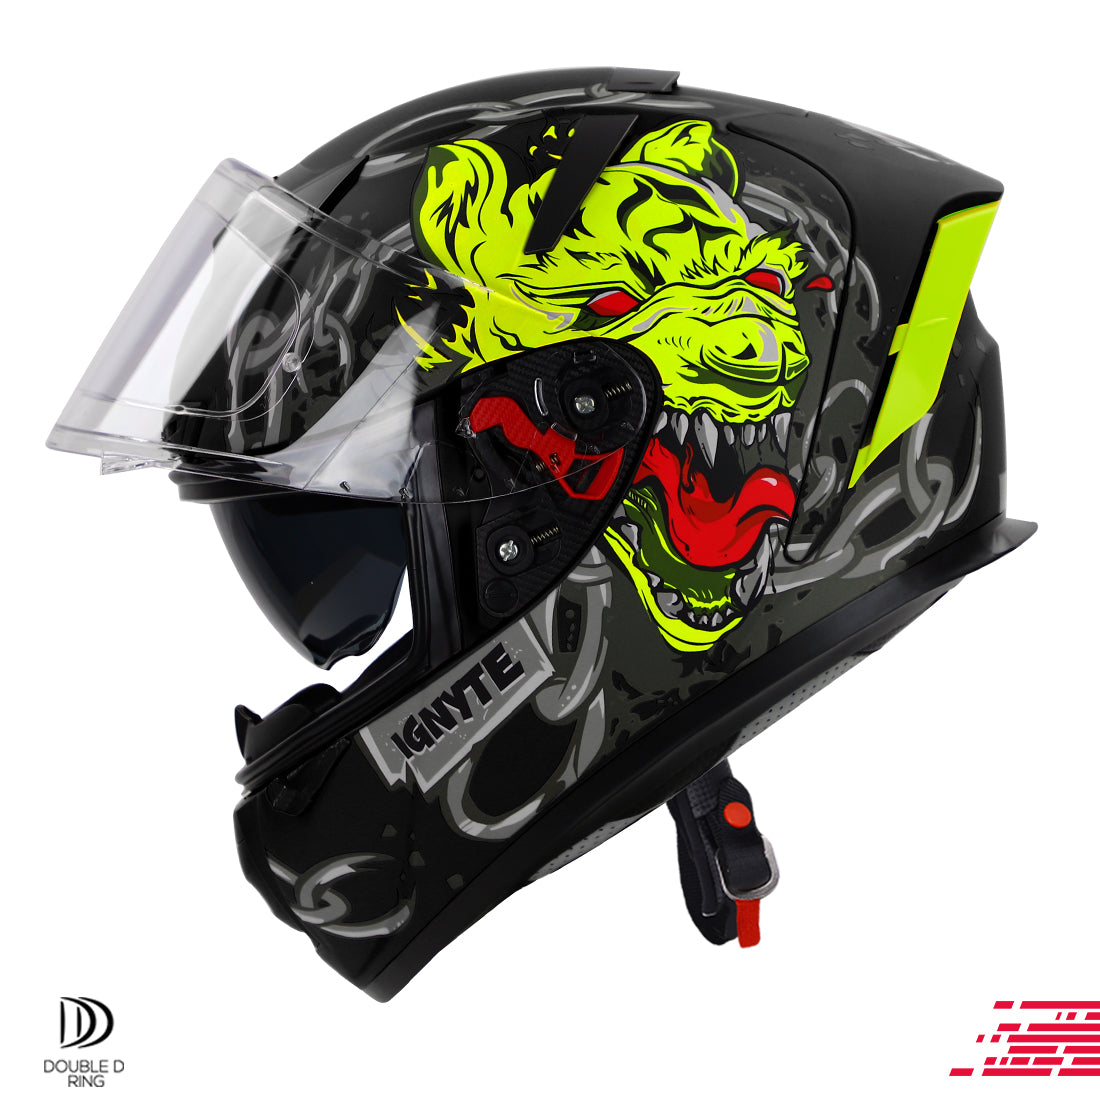 Ignyte IGN-4 Hyena ISI/DOT Certified Full Face Graphic Helmet with Outer Anti-Fog Clear Visor and Inner Smoke Sun Shield